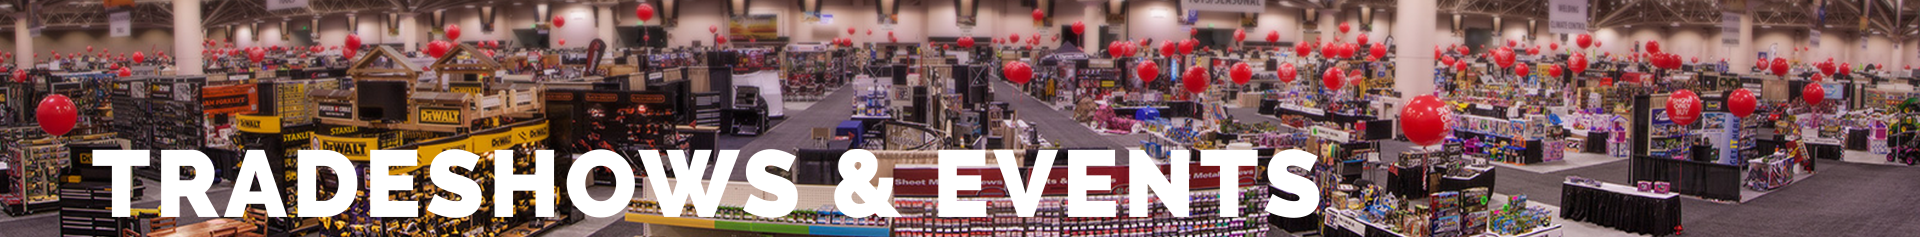 Tradeshows&Events